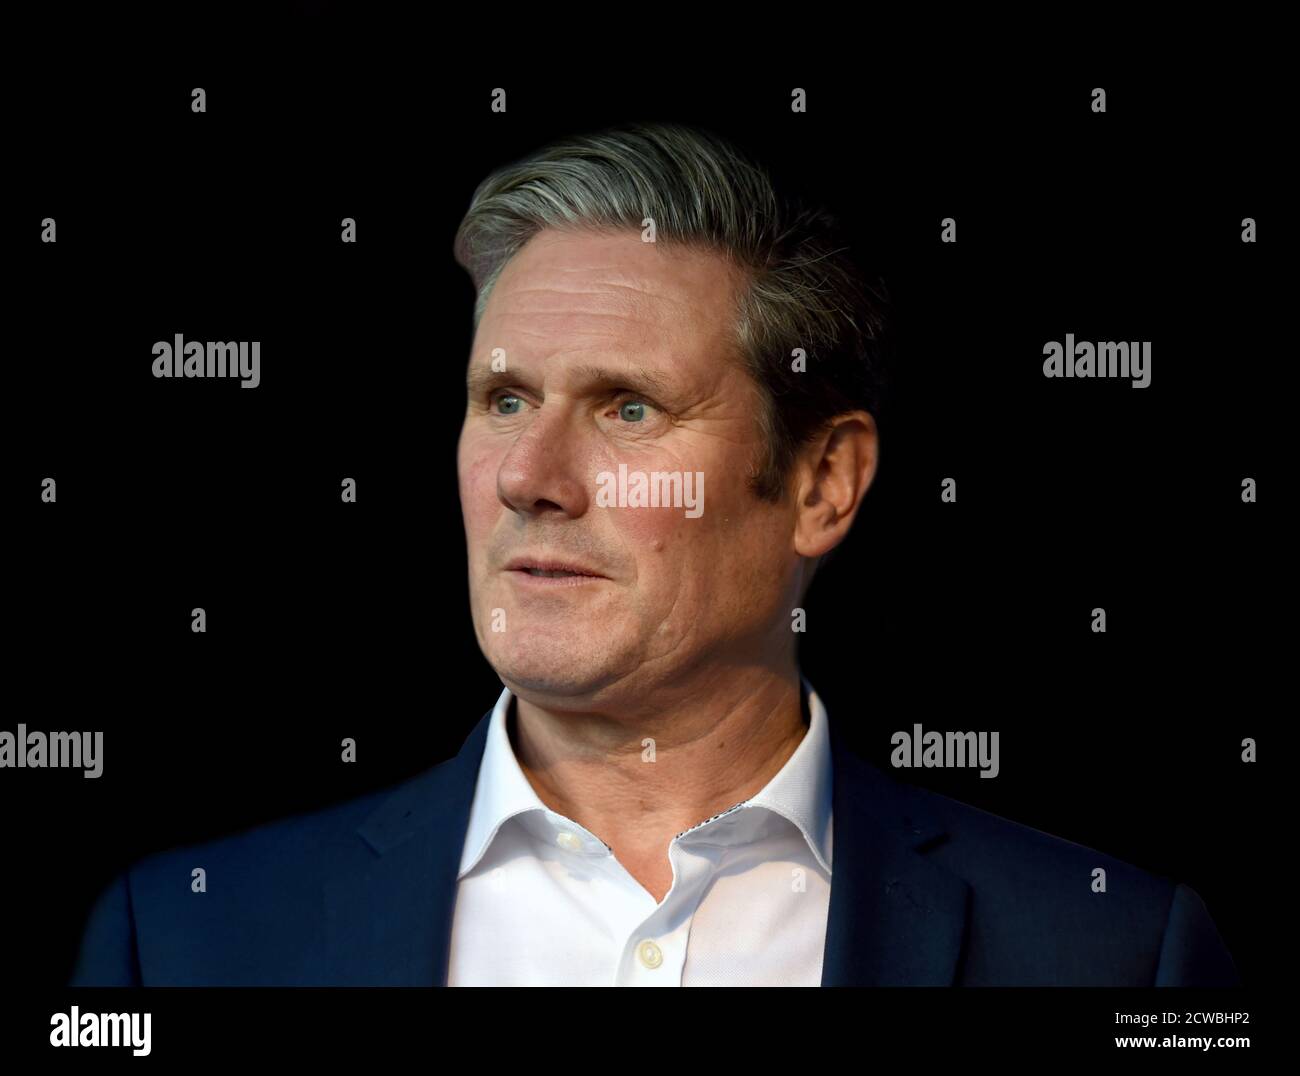 Photograph of Sir Keir Starmer speaking at a 'Pro-Remain' march. Sir Keir Starmer (1962-) a British politician and barrister who has been Member of Parliament for Holborn and St Pancras since 2015 Stock Photo